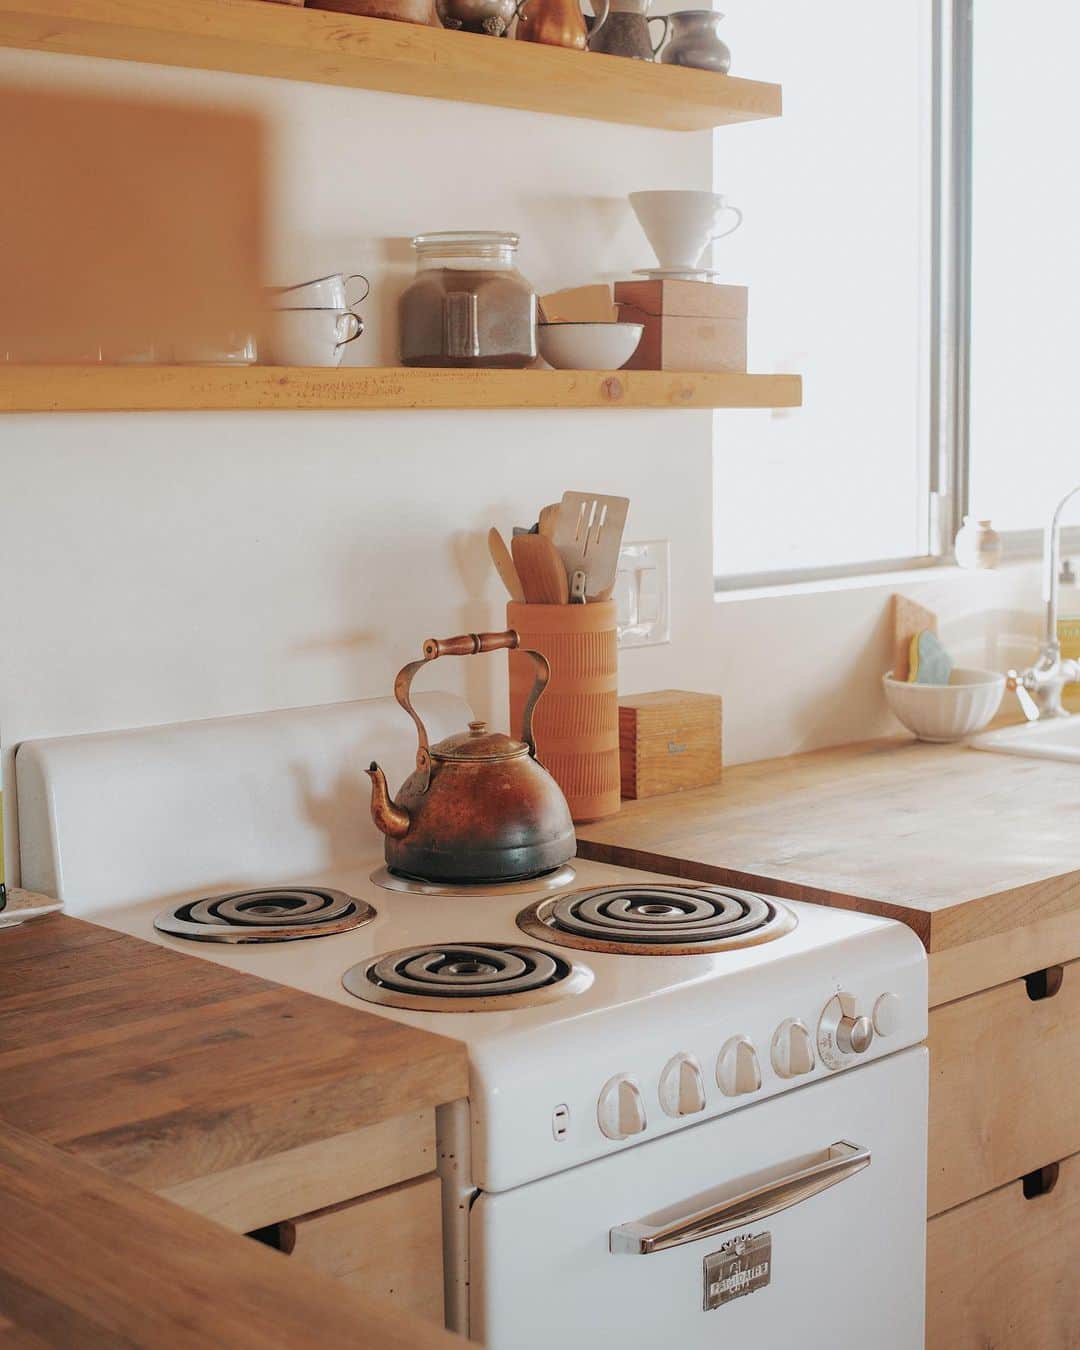 W E Y L I Eのインスタグラム：「I’ve always wanted wood countertops like this! At the time when I was renovating my house, I was told wood countertops are really expensive and hard to keep up. Anyone else have wooden countertops? How do you like it?」